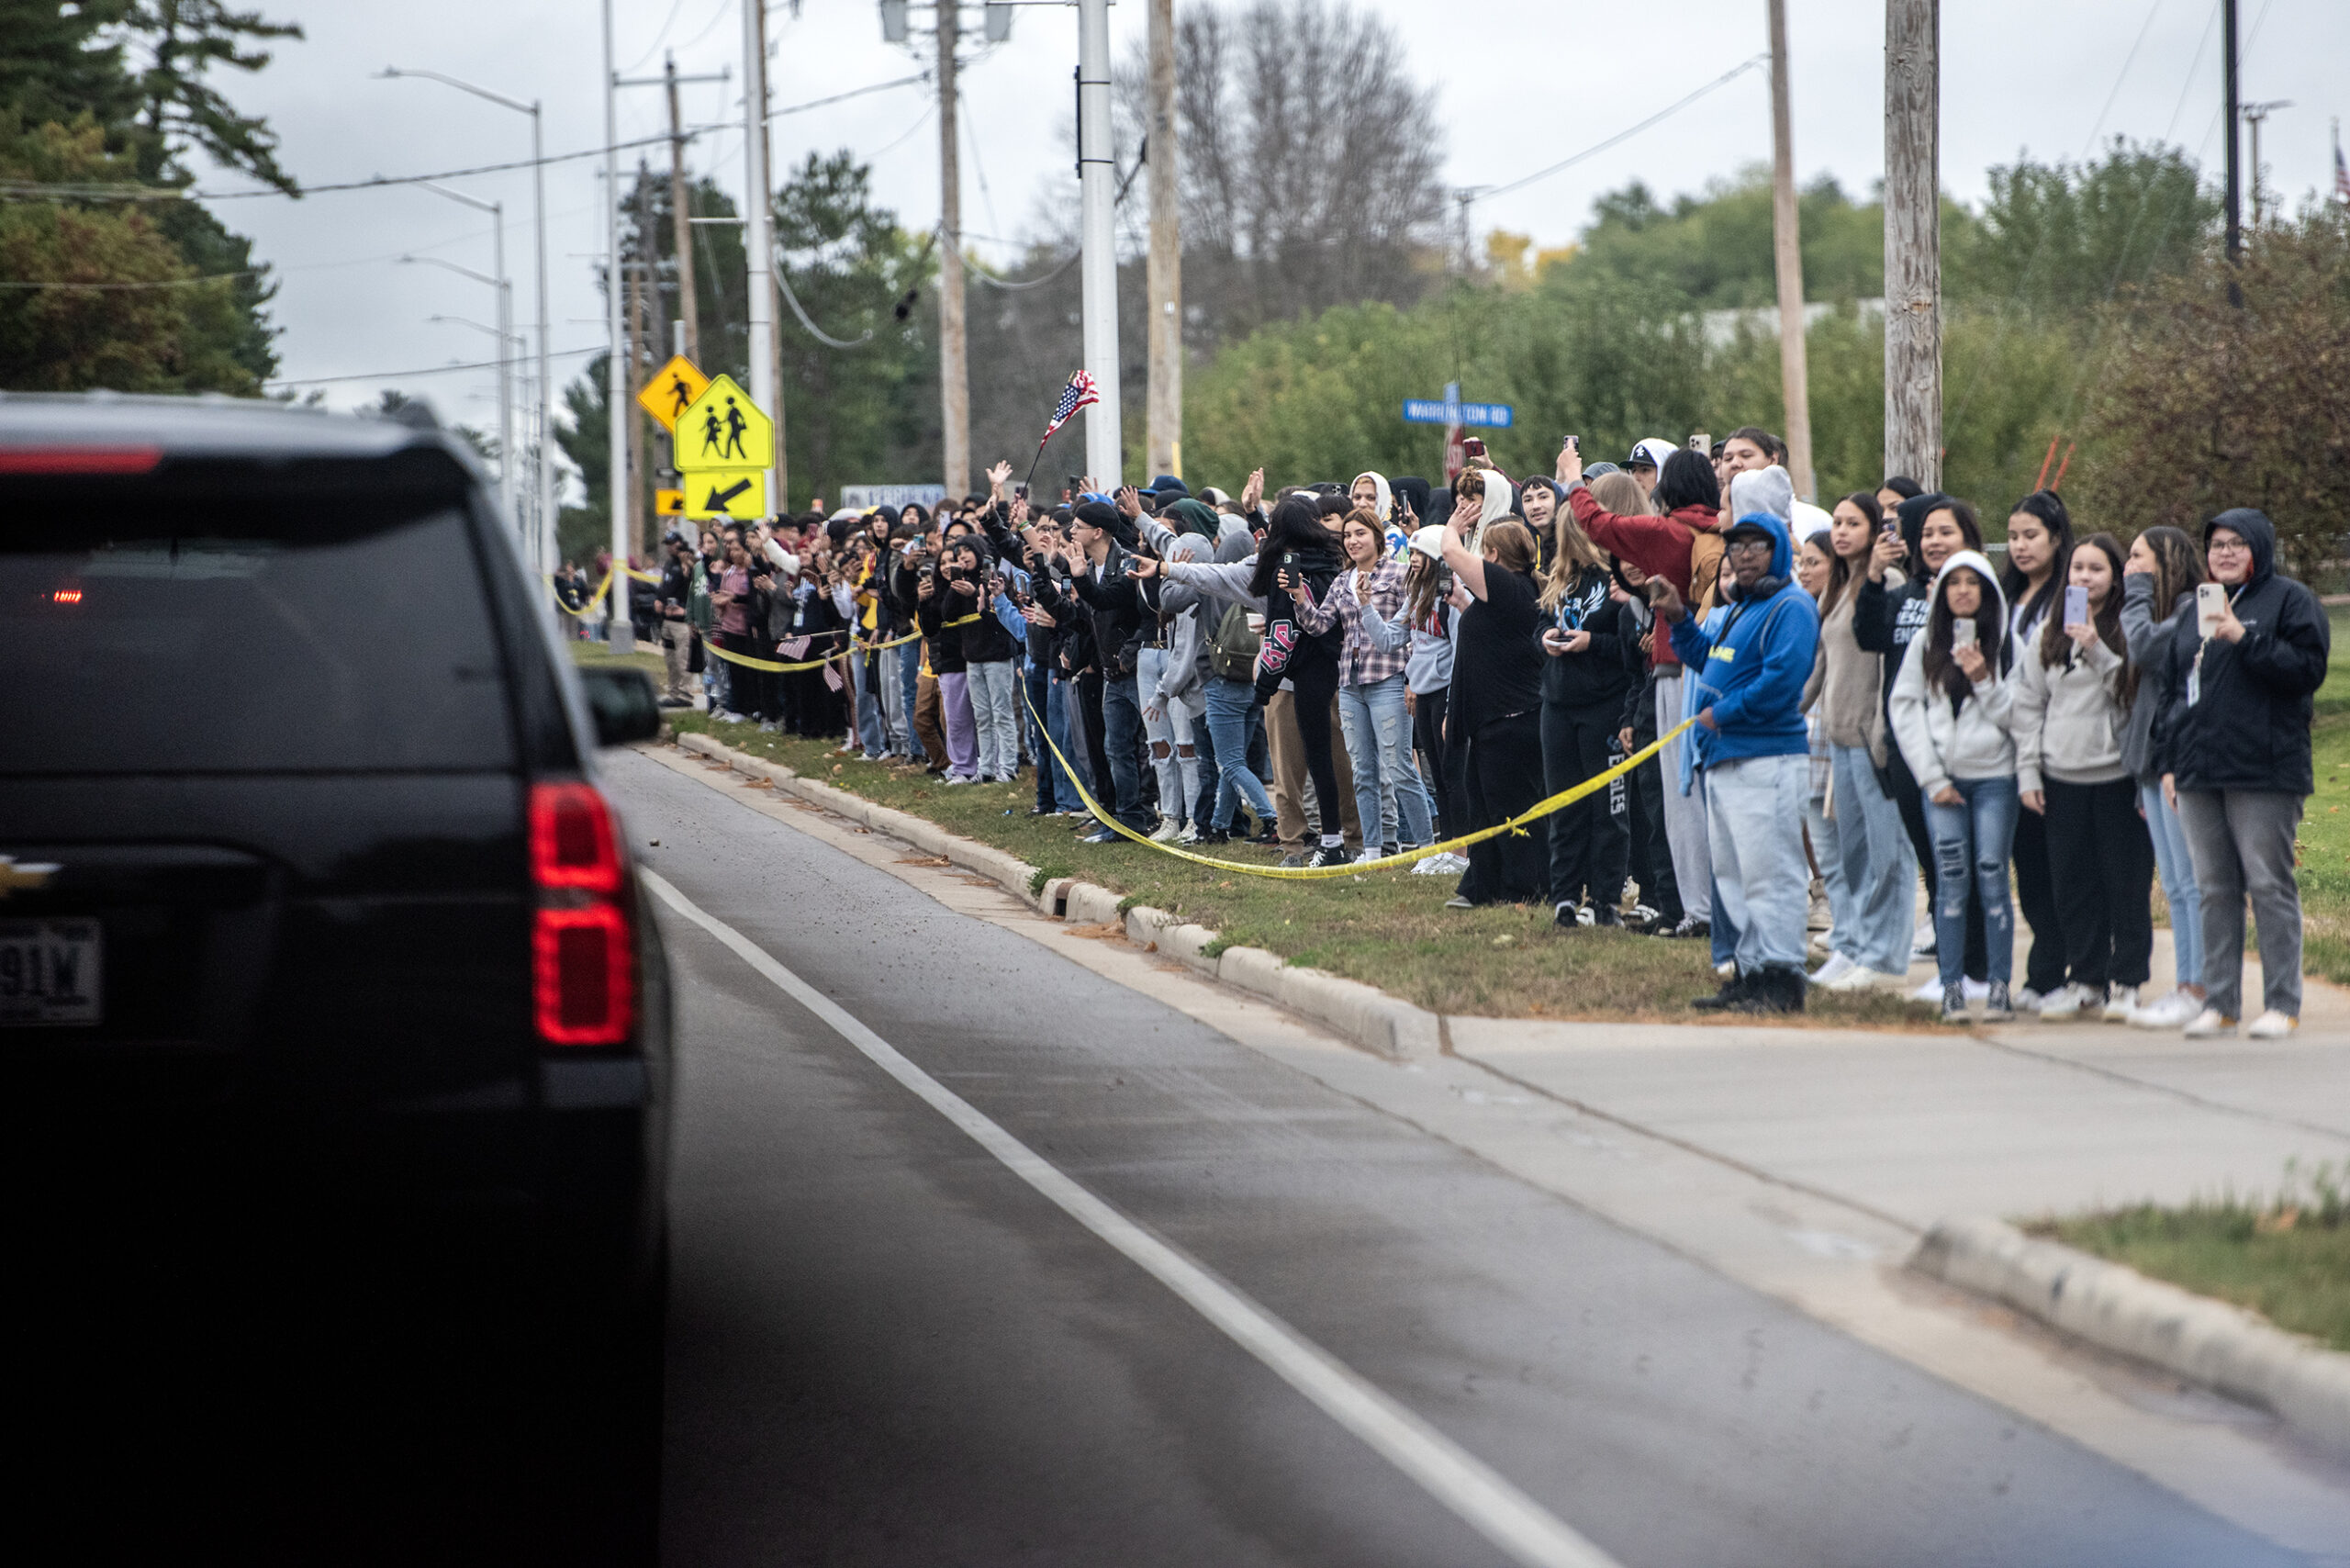 A crowd of students stand outside as black SUV's pass by.